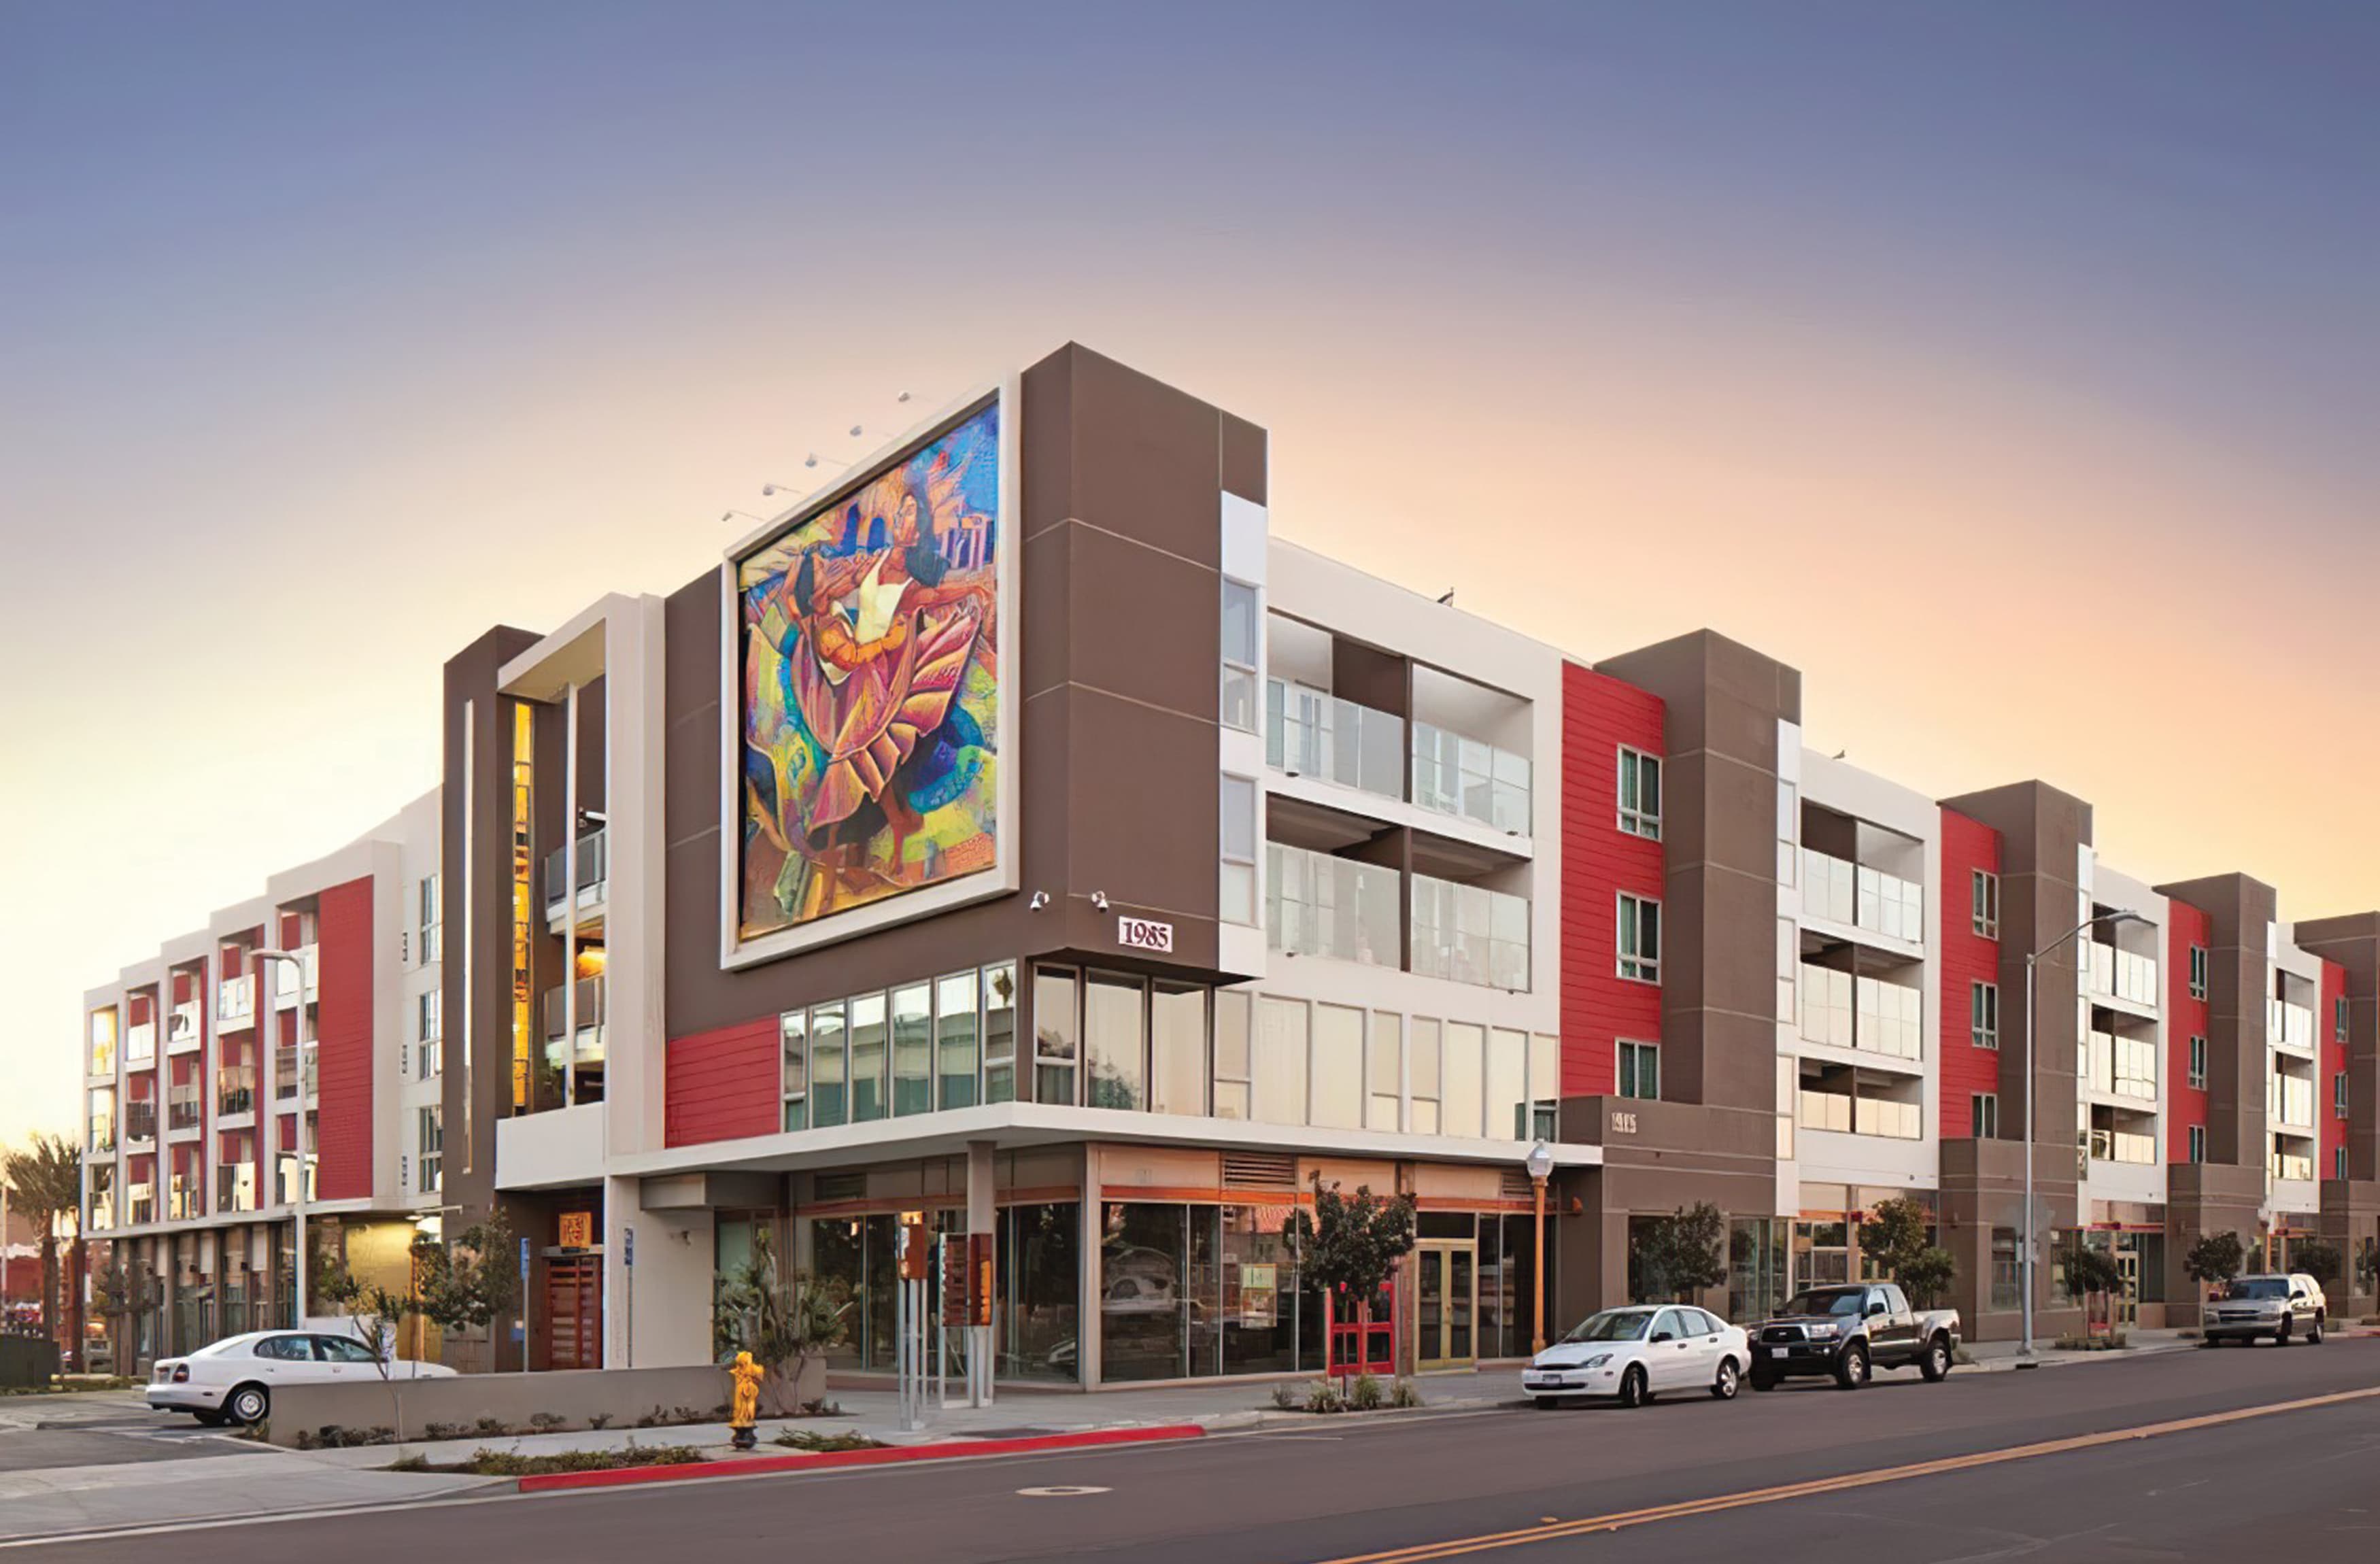 A photograph of a mixed-use residential and retail building located at Barrio Logan in San Diego, CA.